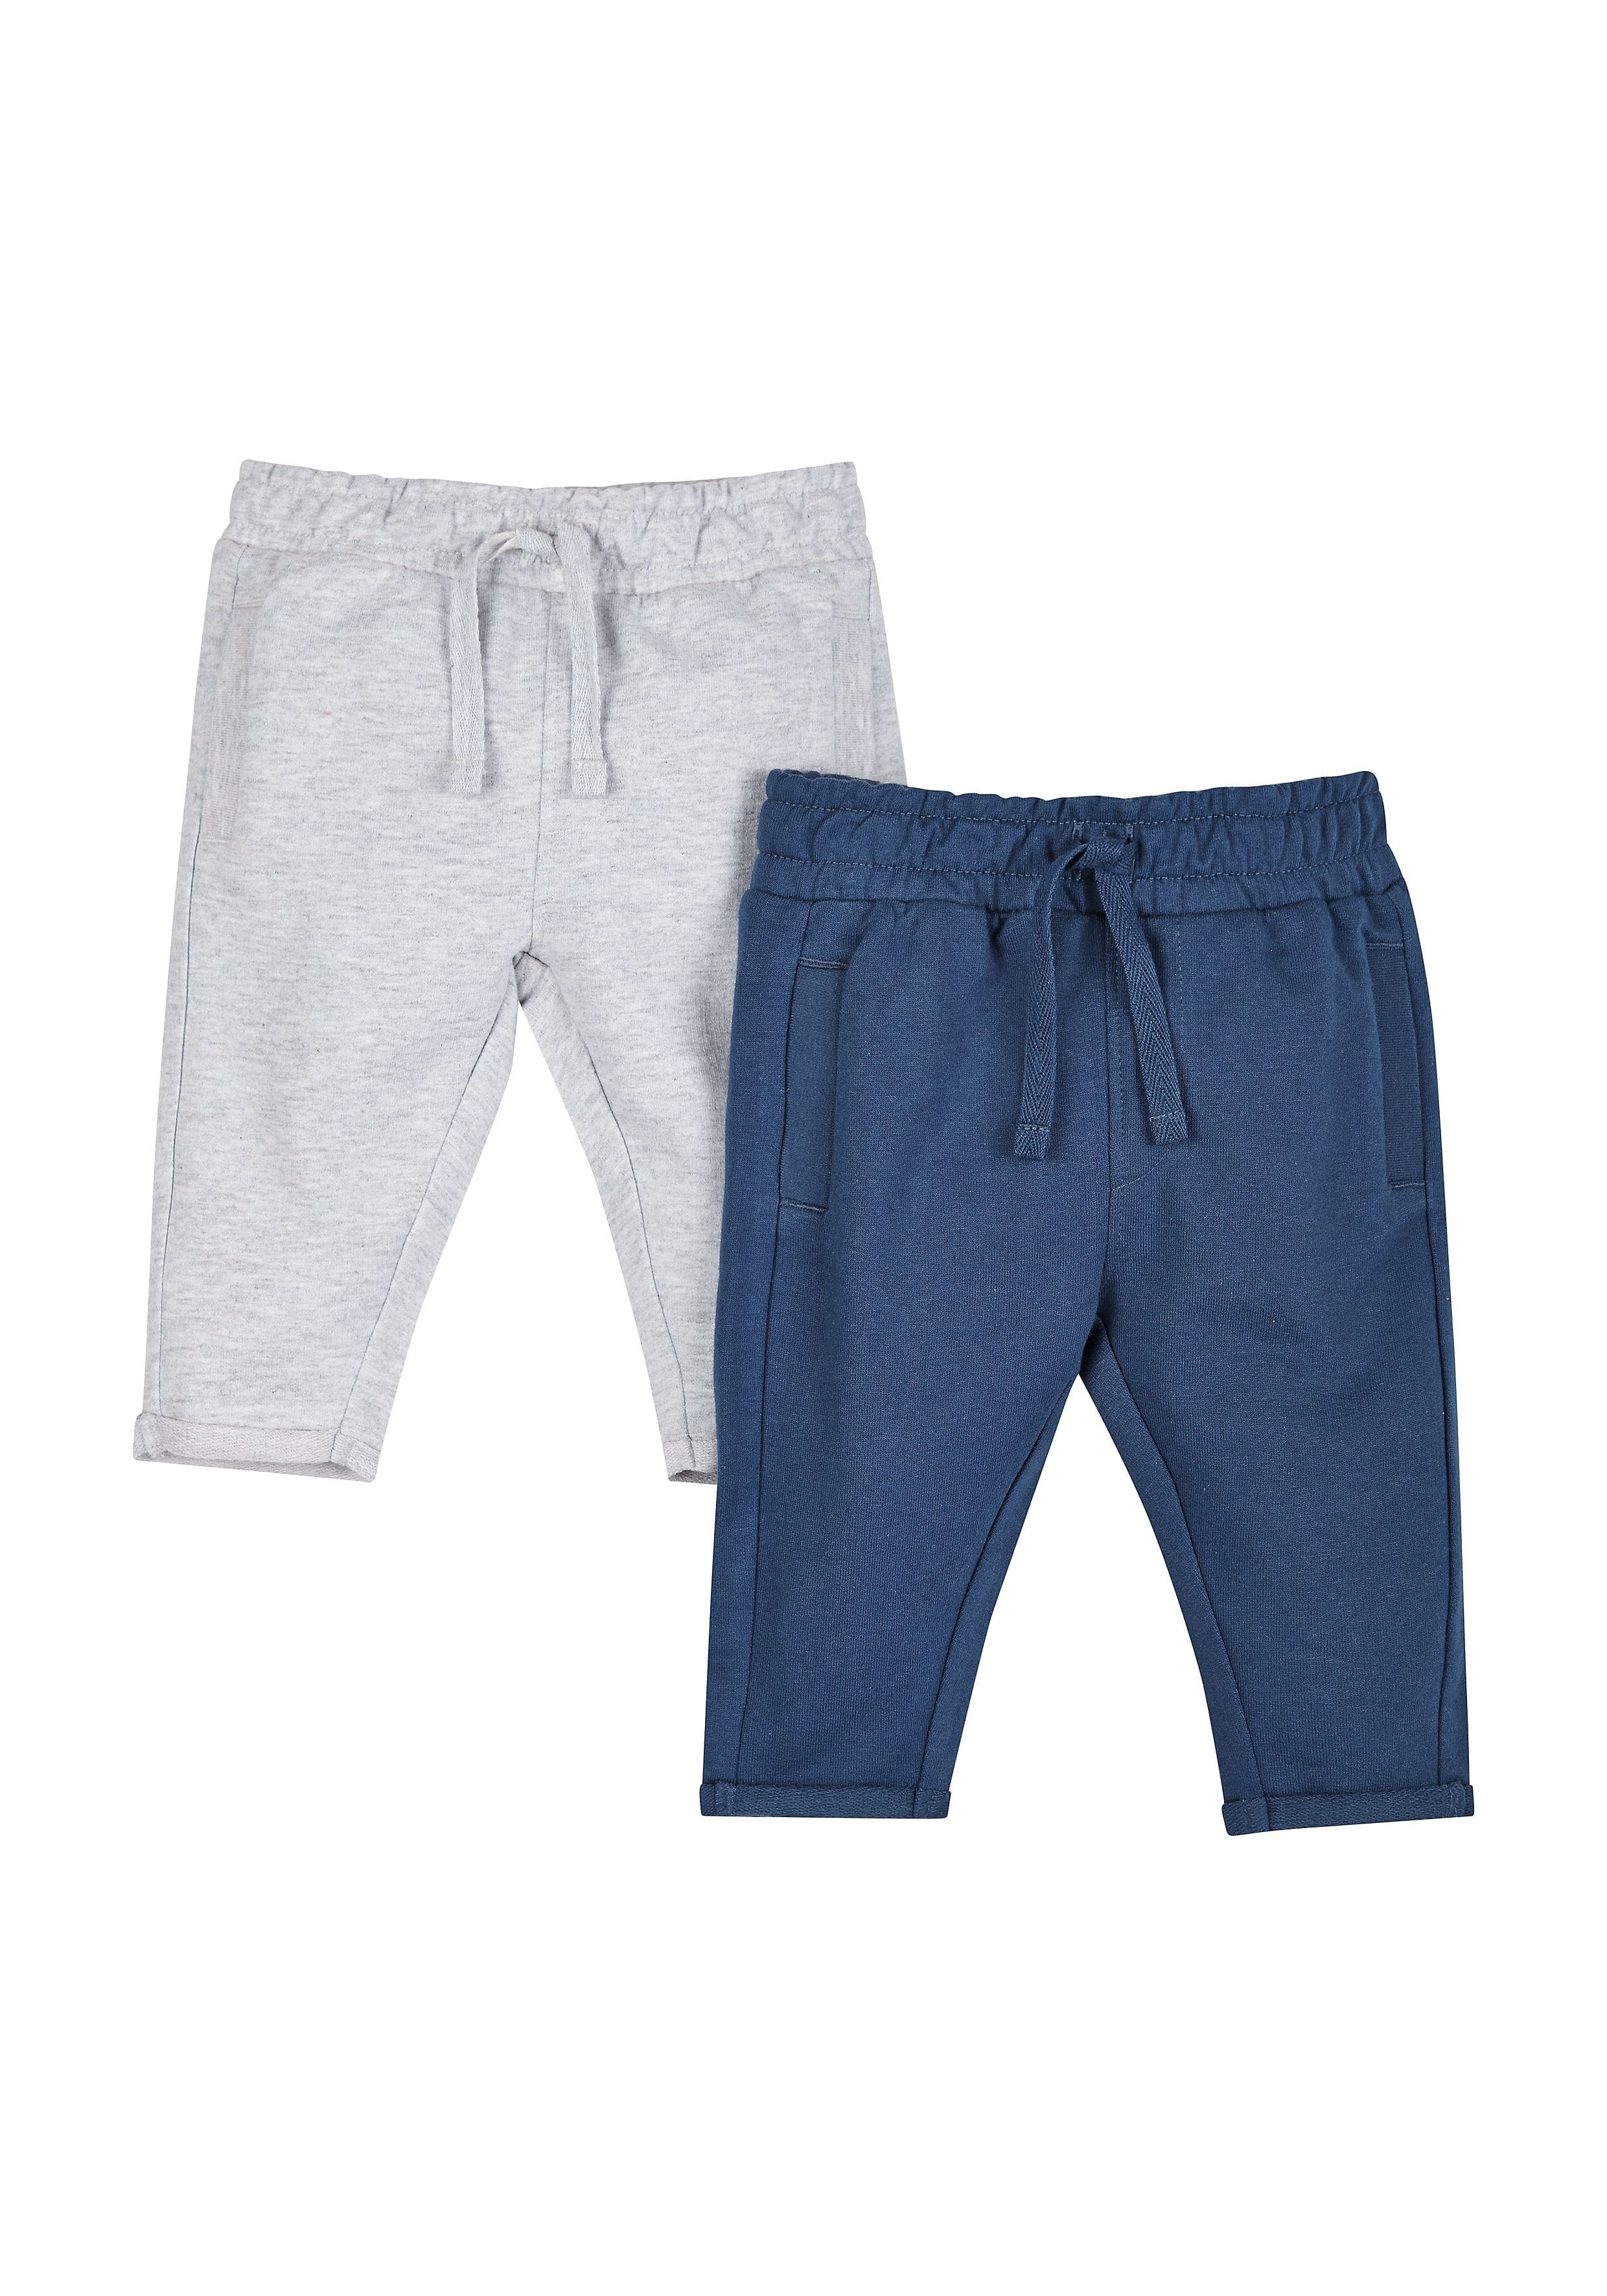 Mothercare | Boys Grey Marl And Navy Joggers - Pack Of 2 0